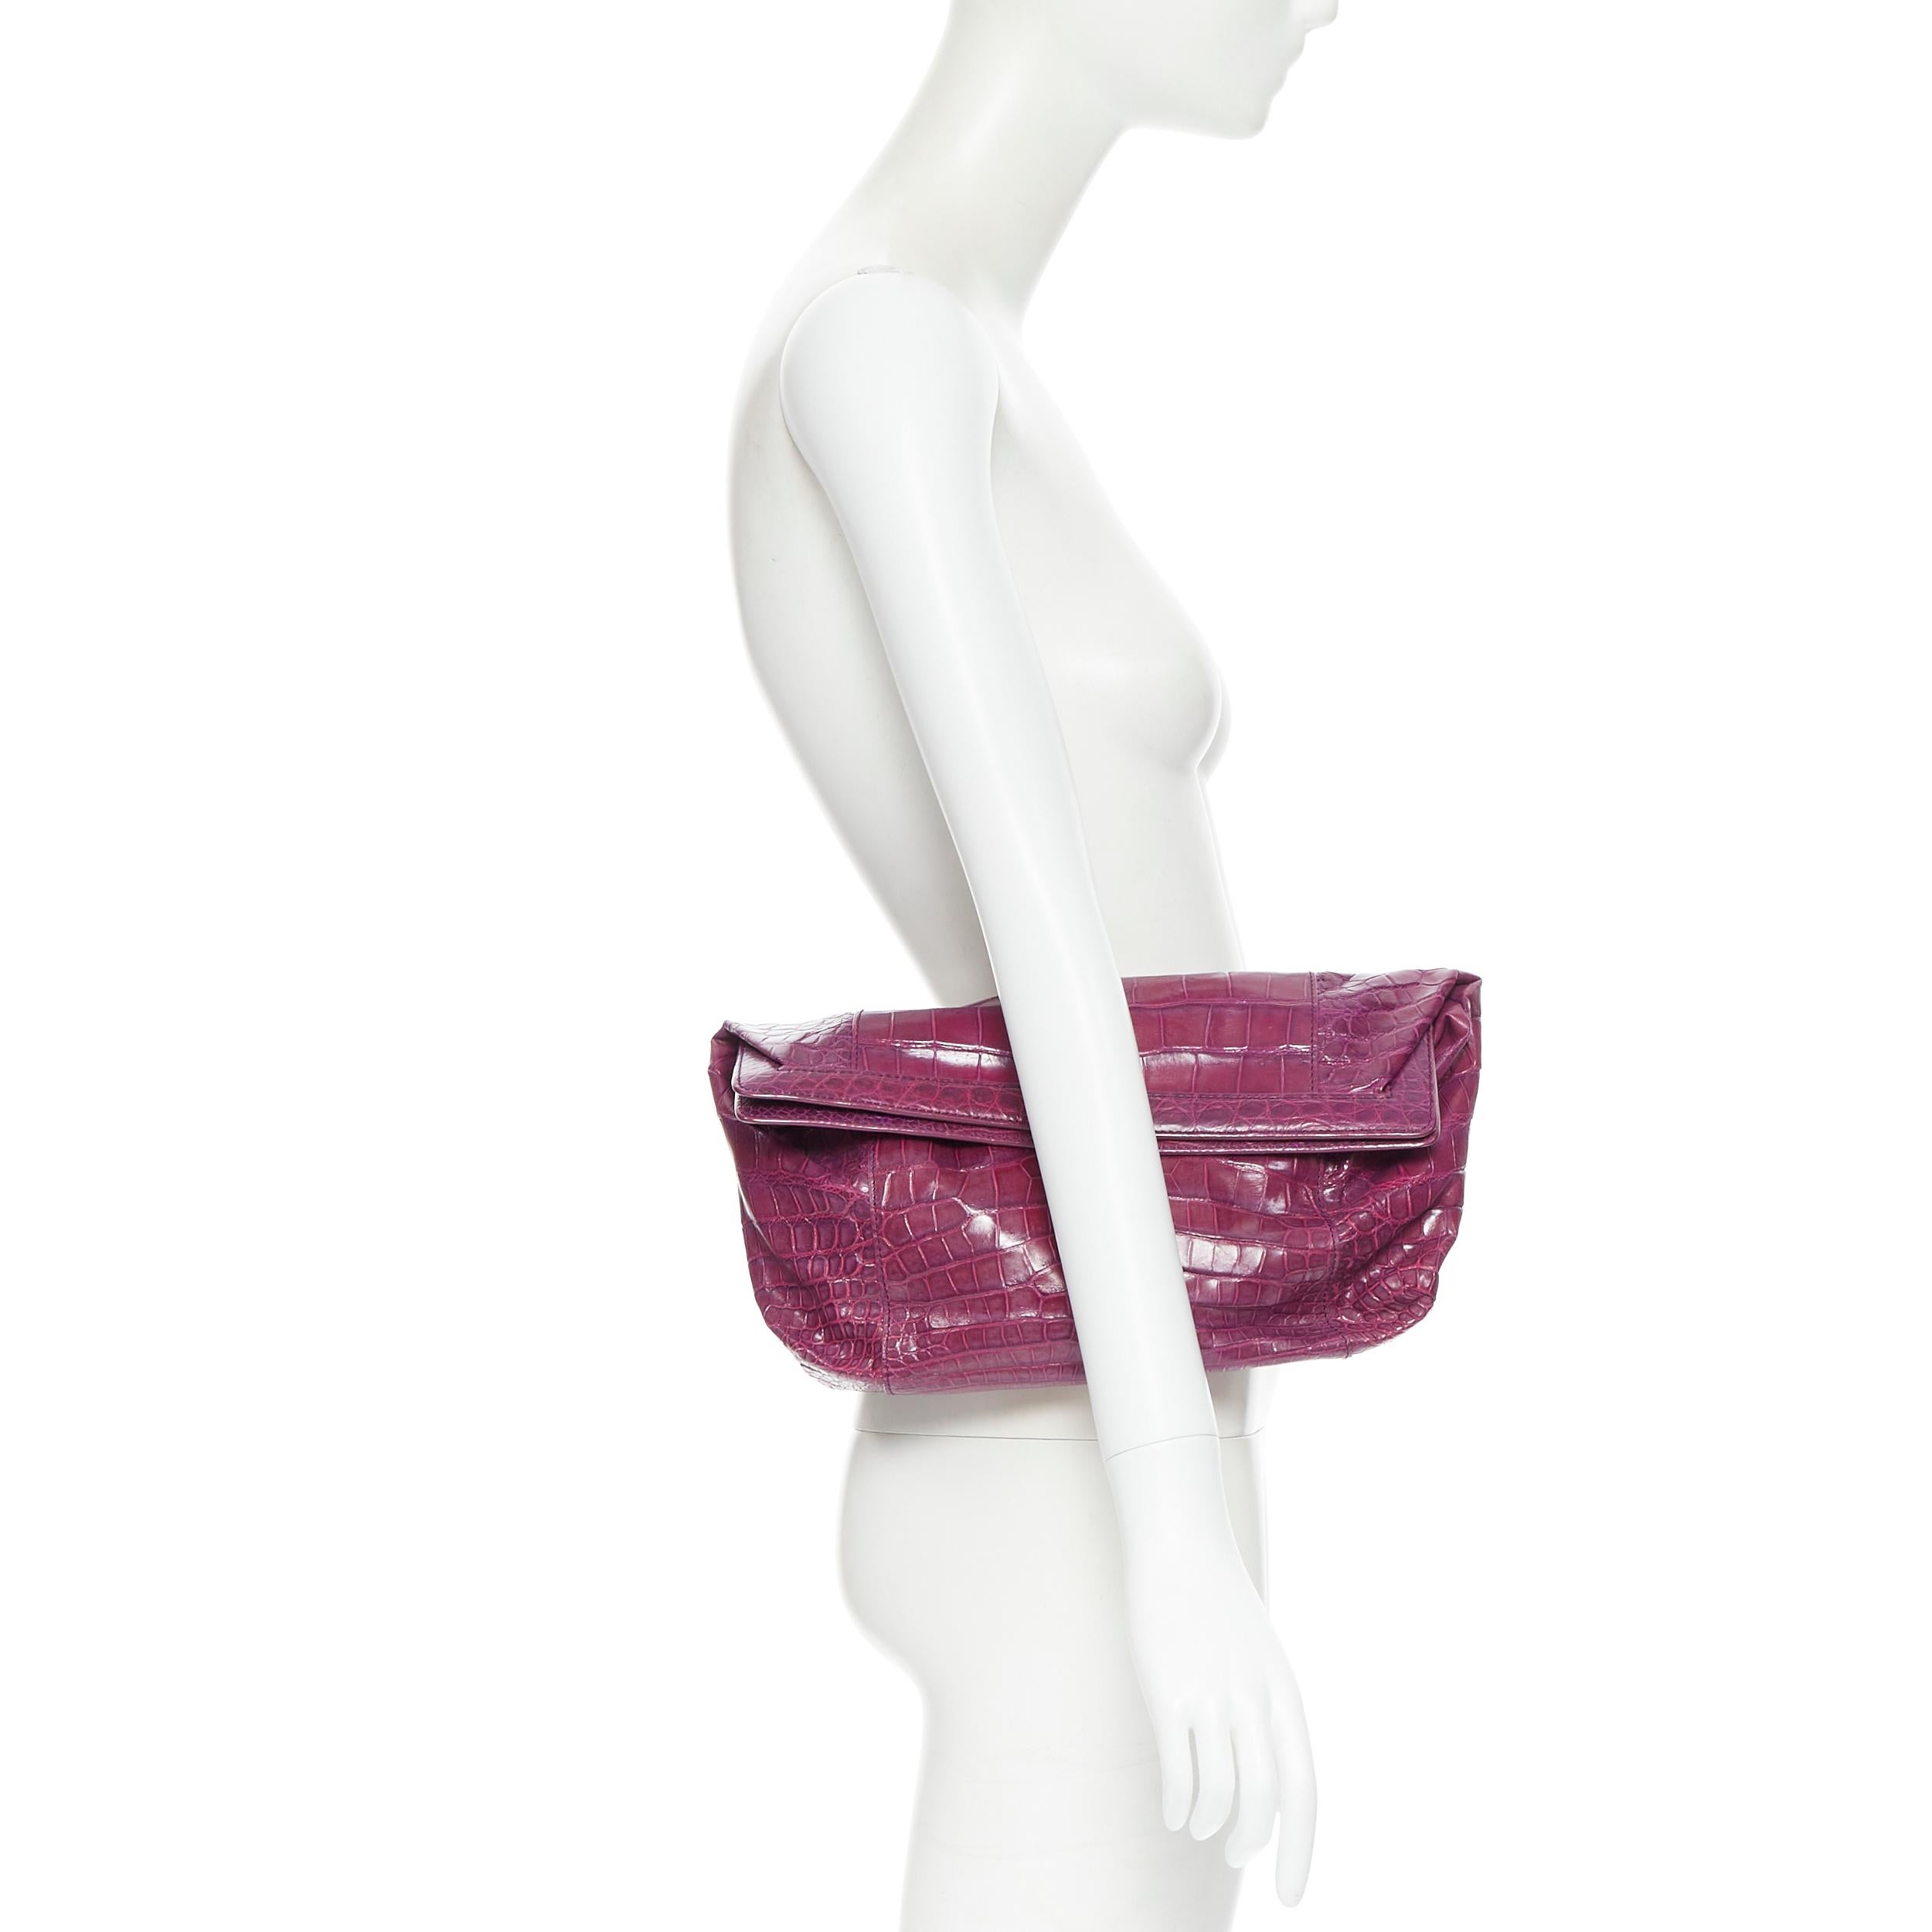 Purple crocodile scaled leather angular frame pouch clutch bag 
Reference: LNKO/A01775 
Brand: No Brand 
Model: Crocodile clutch 
Material: Other 
Color: Purple 
Pattern: Solid 
Closure: Magnetic 
Extra Detail: Customized with a embossed name tag at